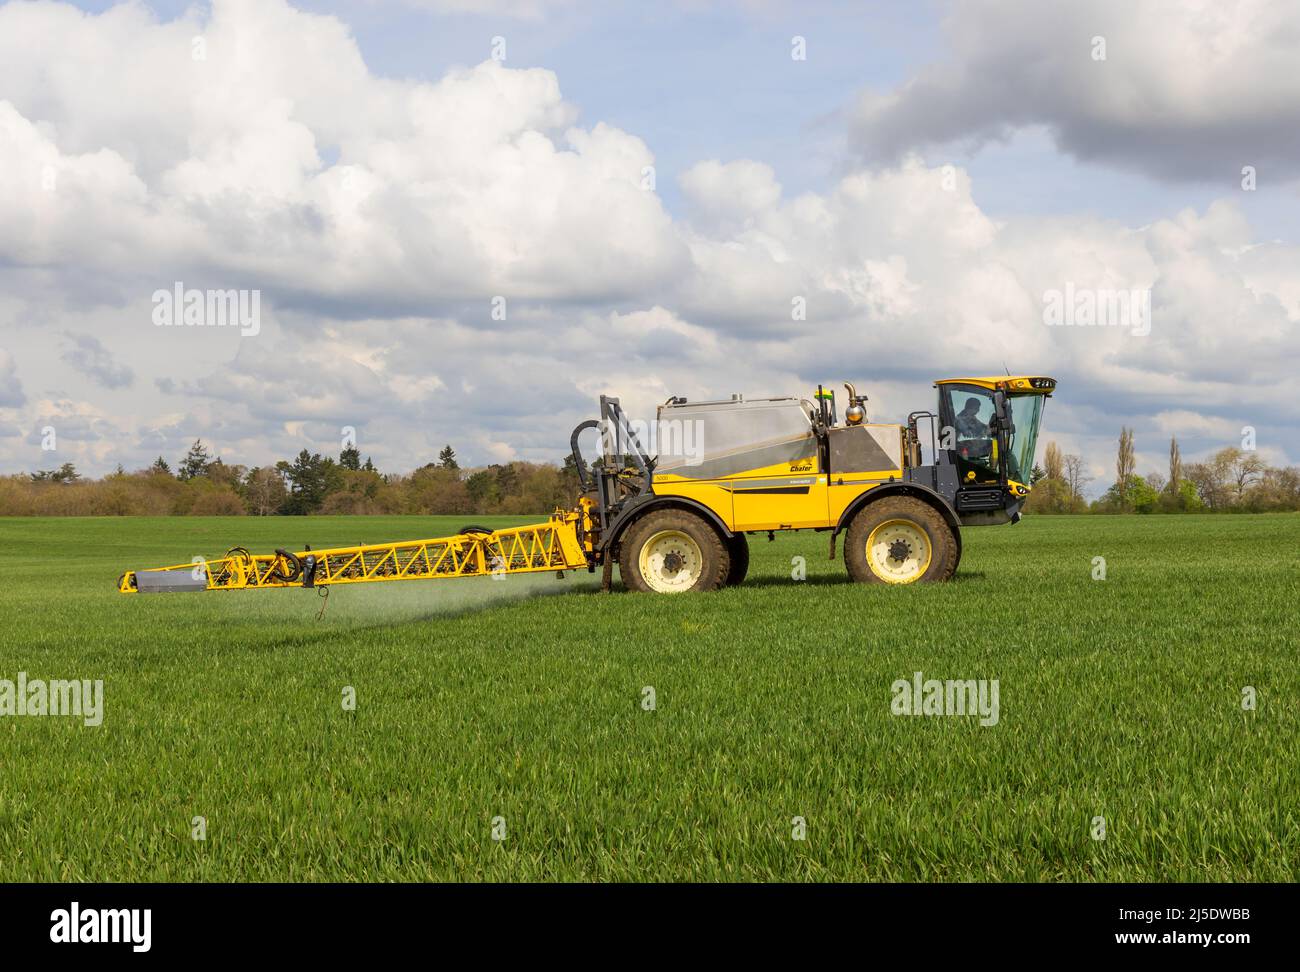 Farmer using a self propelled crop sprayer in a field in early spring. Hertfordshire, UK Stock Photo